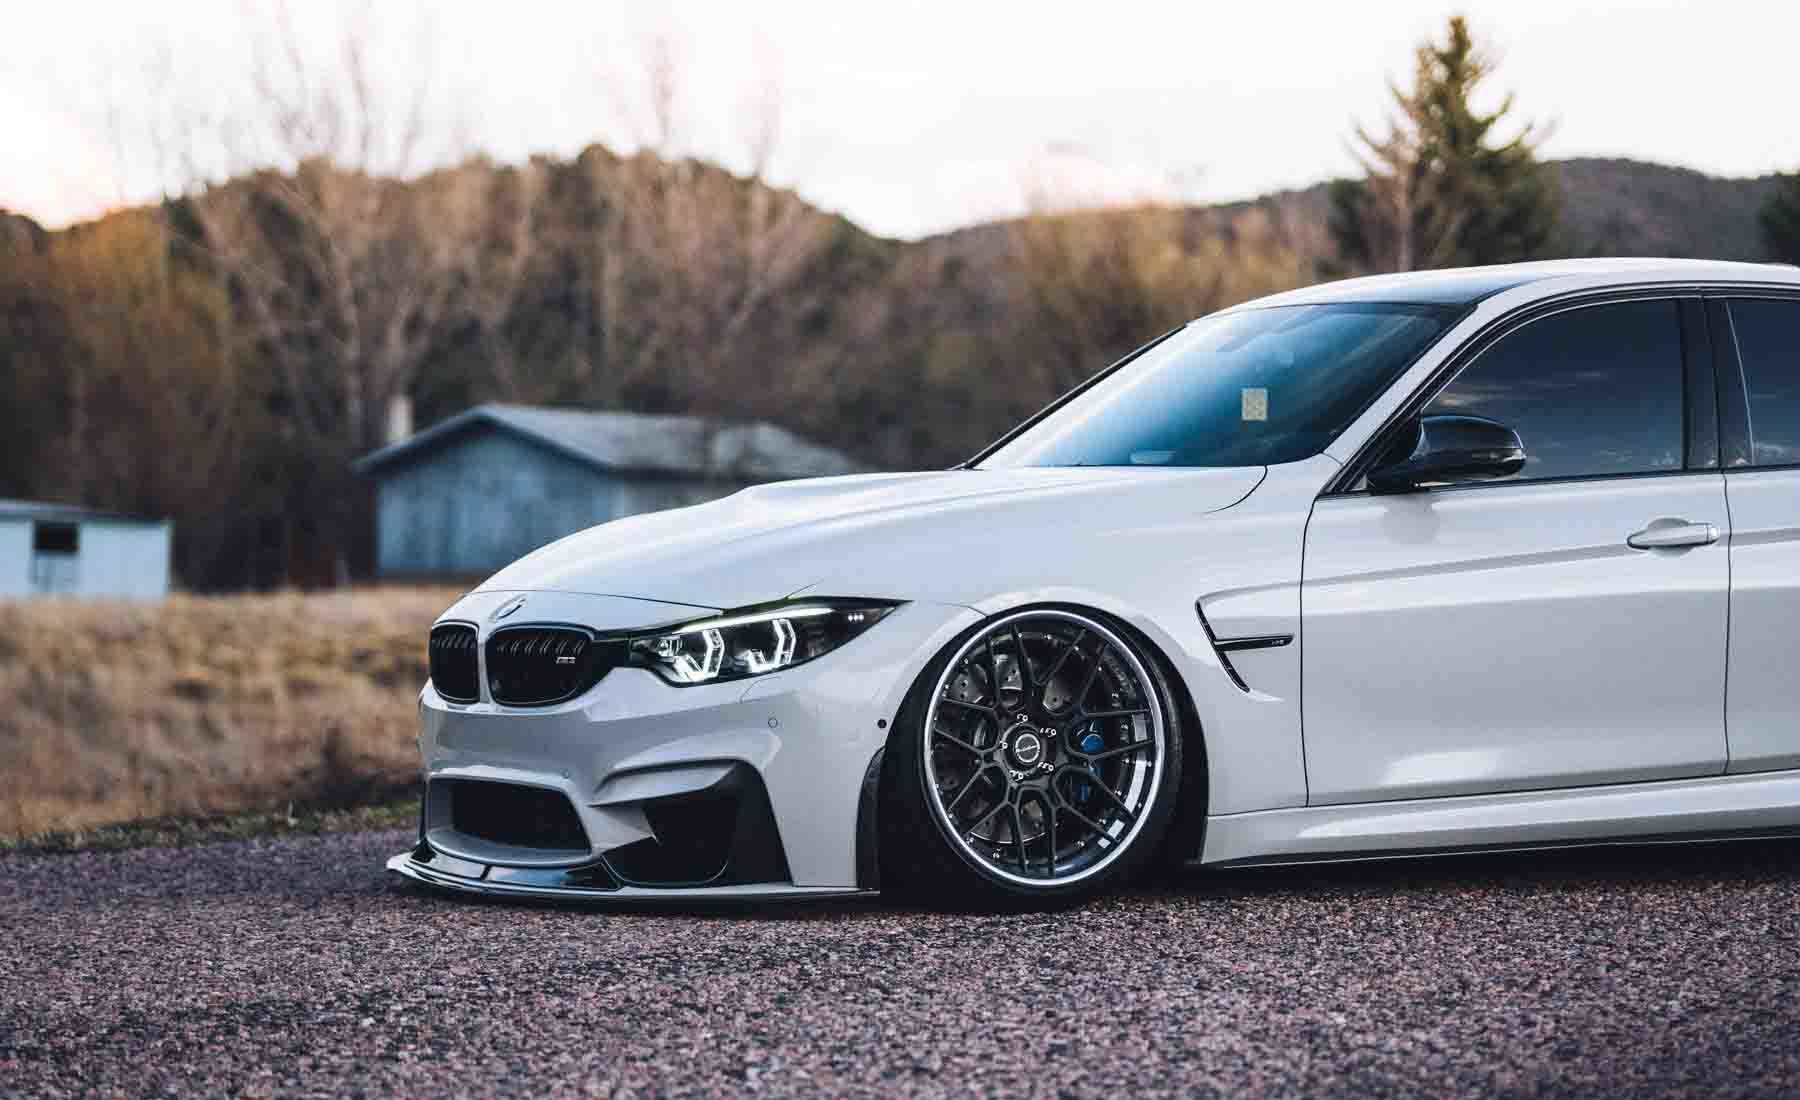 images-products-1-2636-232974924-fashion-grey-bmw-f80-m3-brixton-forged-cm8-targa-series-3-piece-concave-forged-wheels-20-brushed.jpg